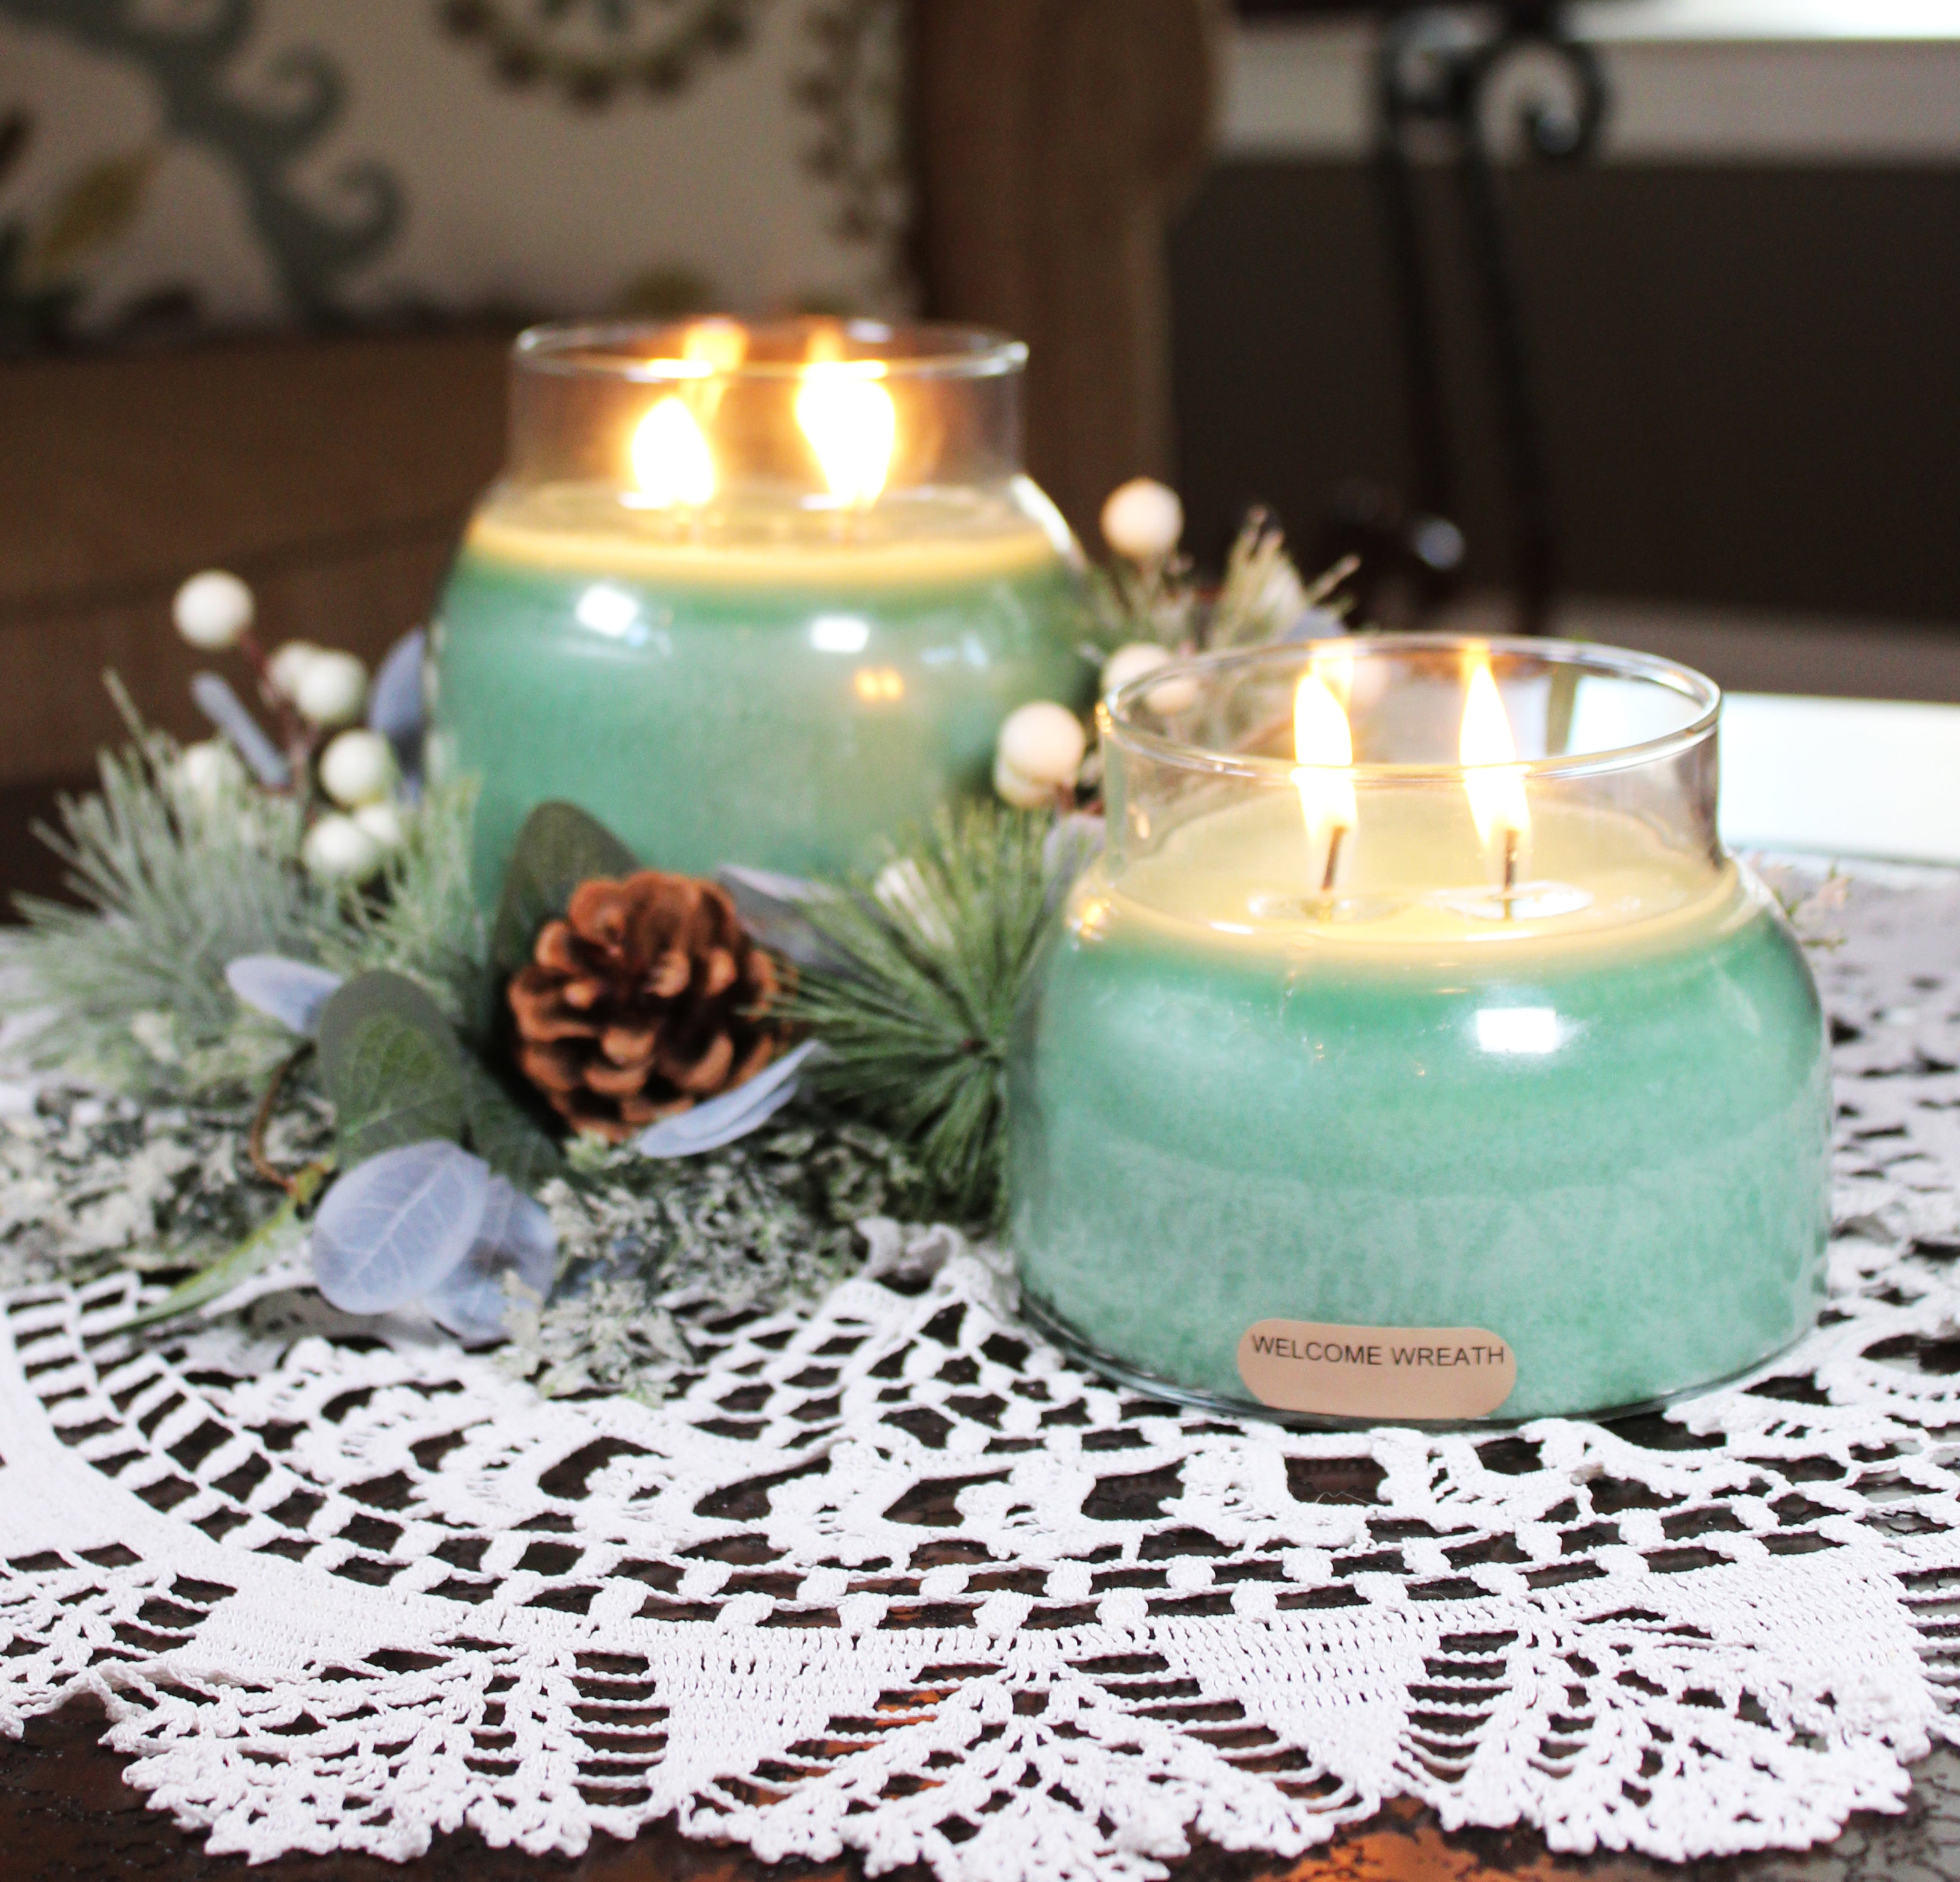 4 Ways to Add Scent to a Candle - wikiHow